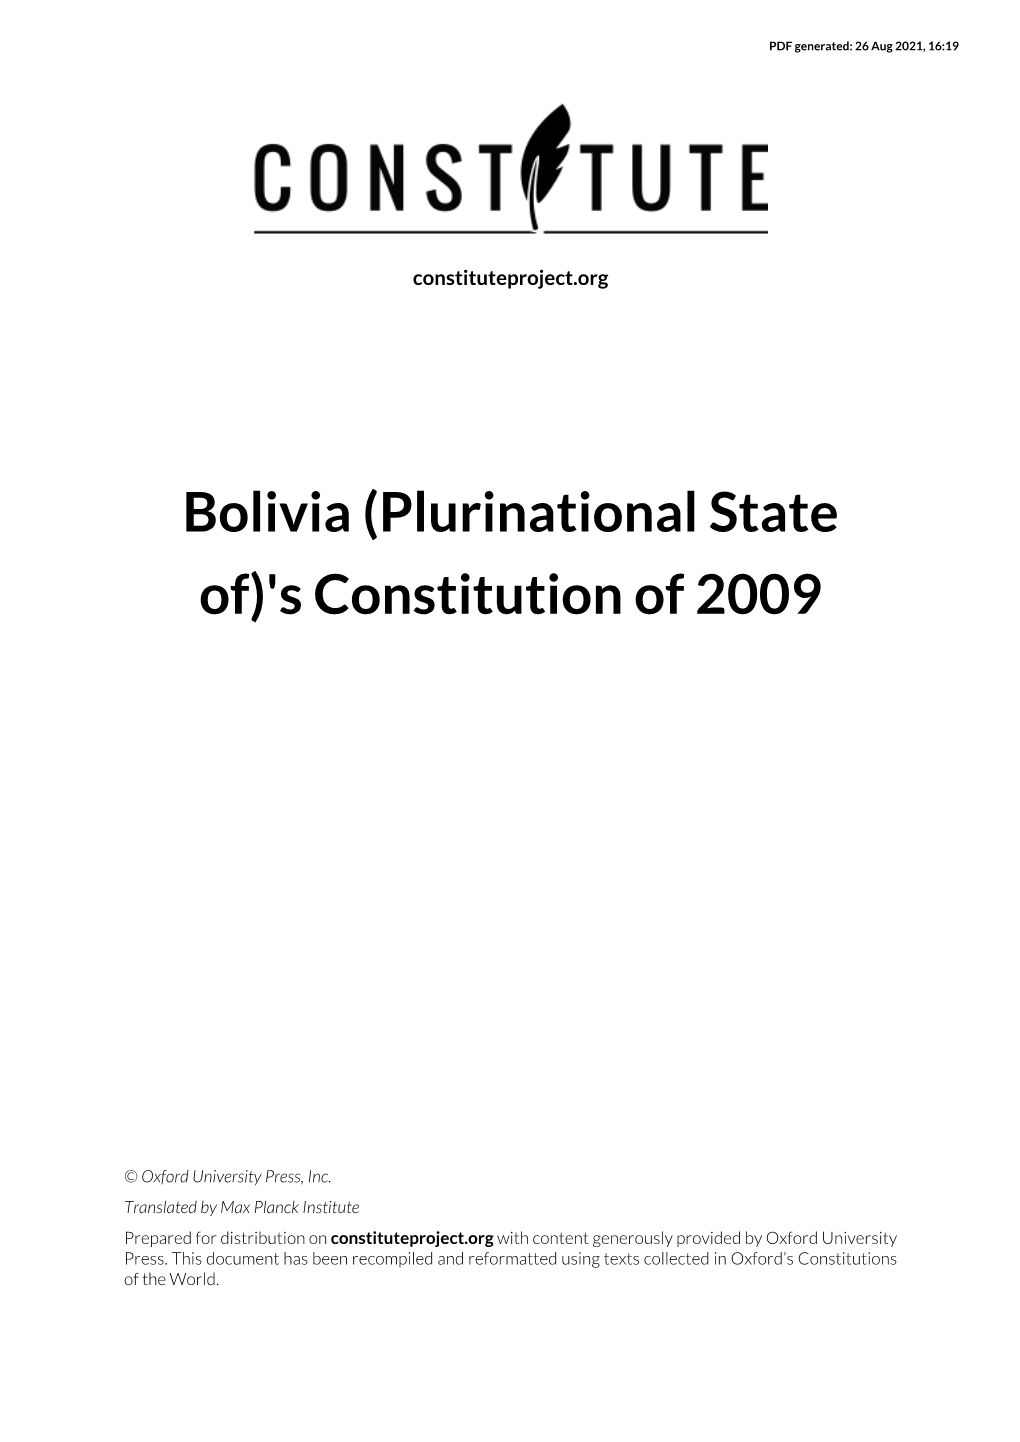 Bolivia (Plurinational State Of)'S Constitution of 2009